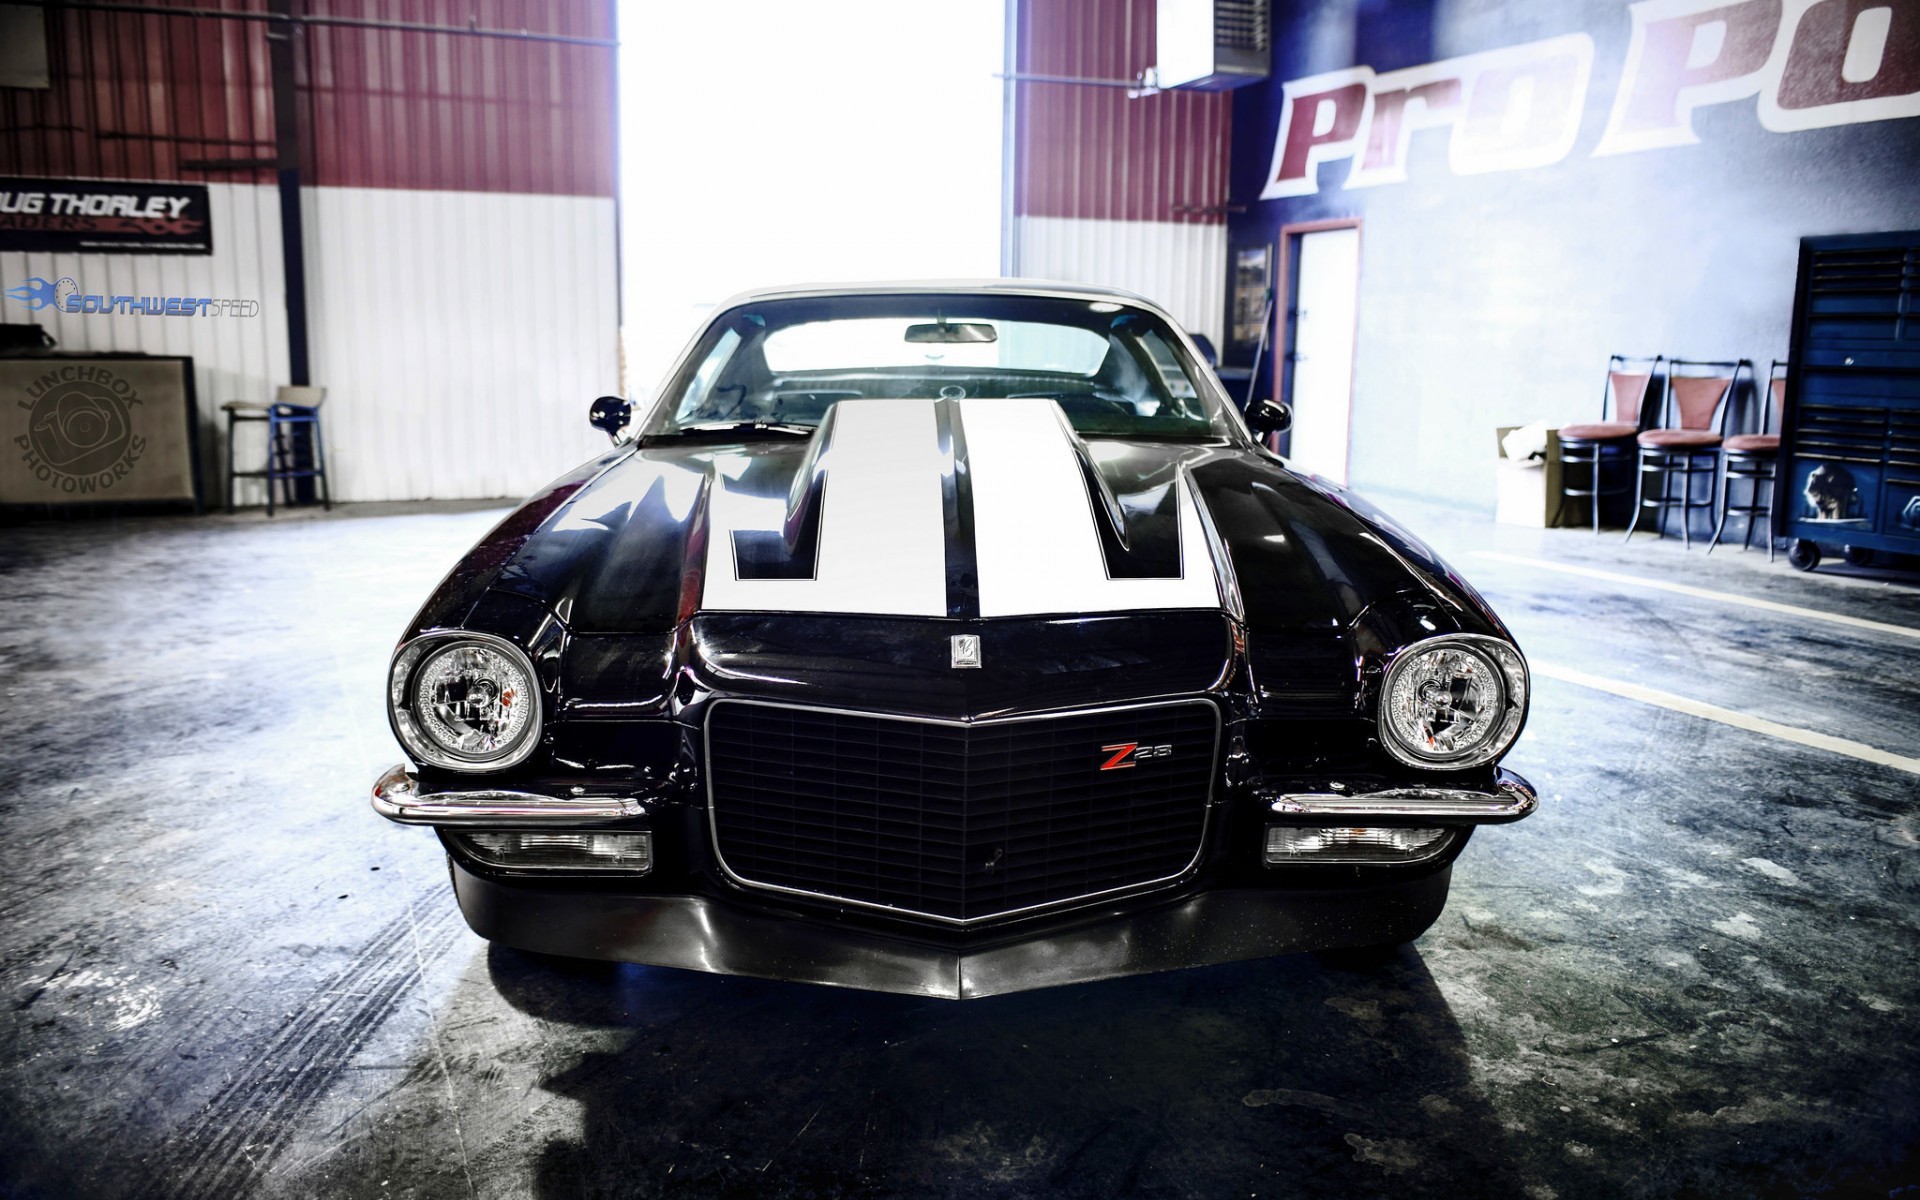 1920x1200 ... American Muscle Car Wallpaper - Android Apps on Google Play ...